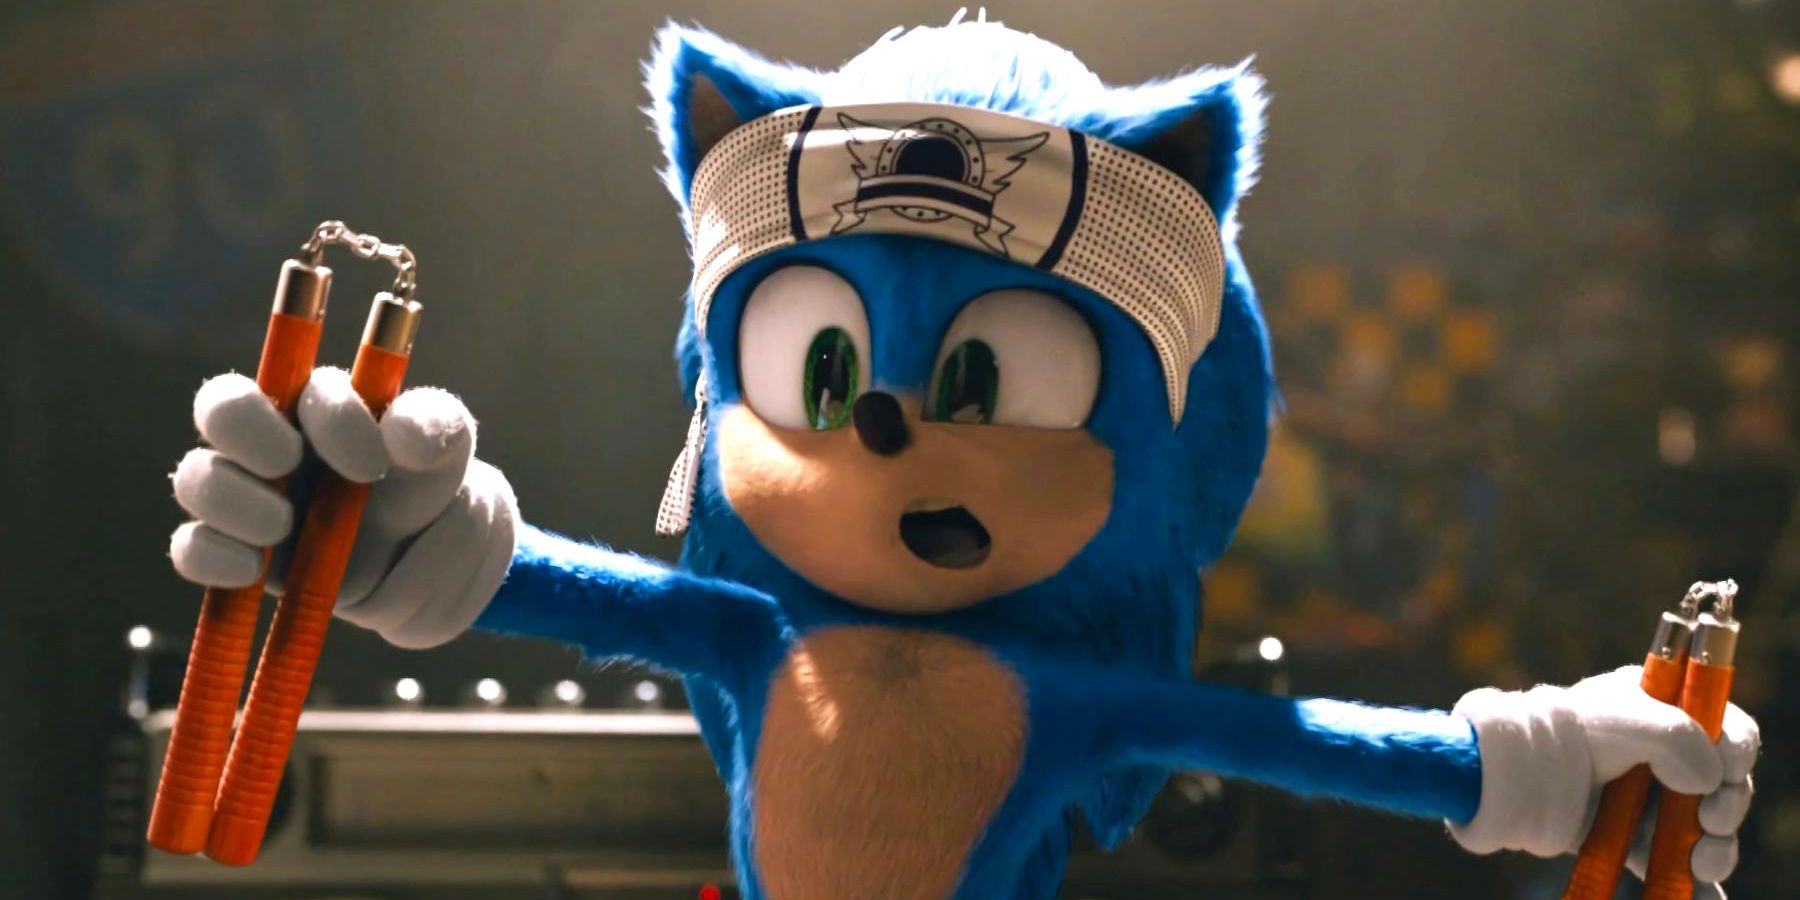 Sonic the Hedgehog with Nunchucks in movie